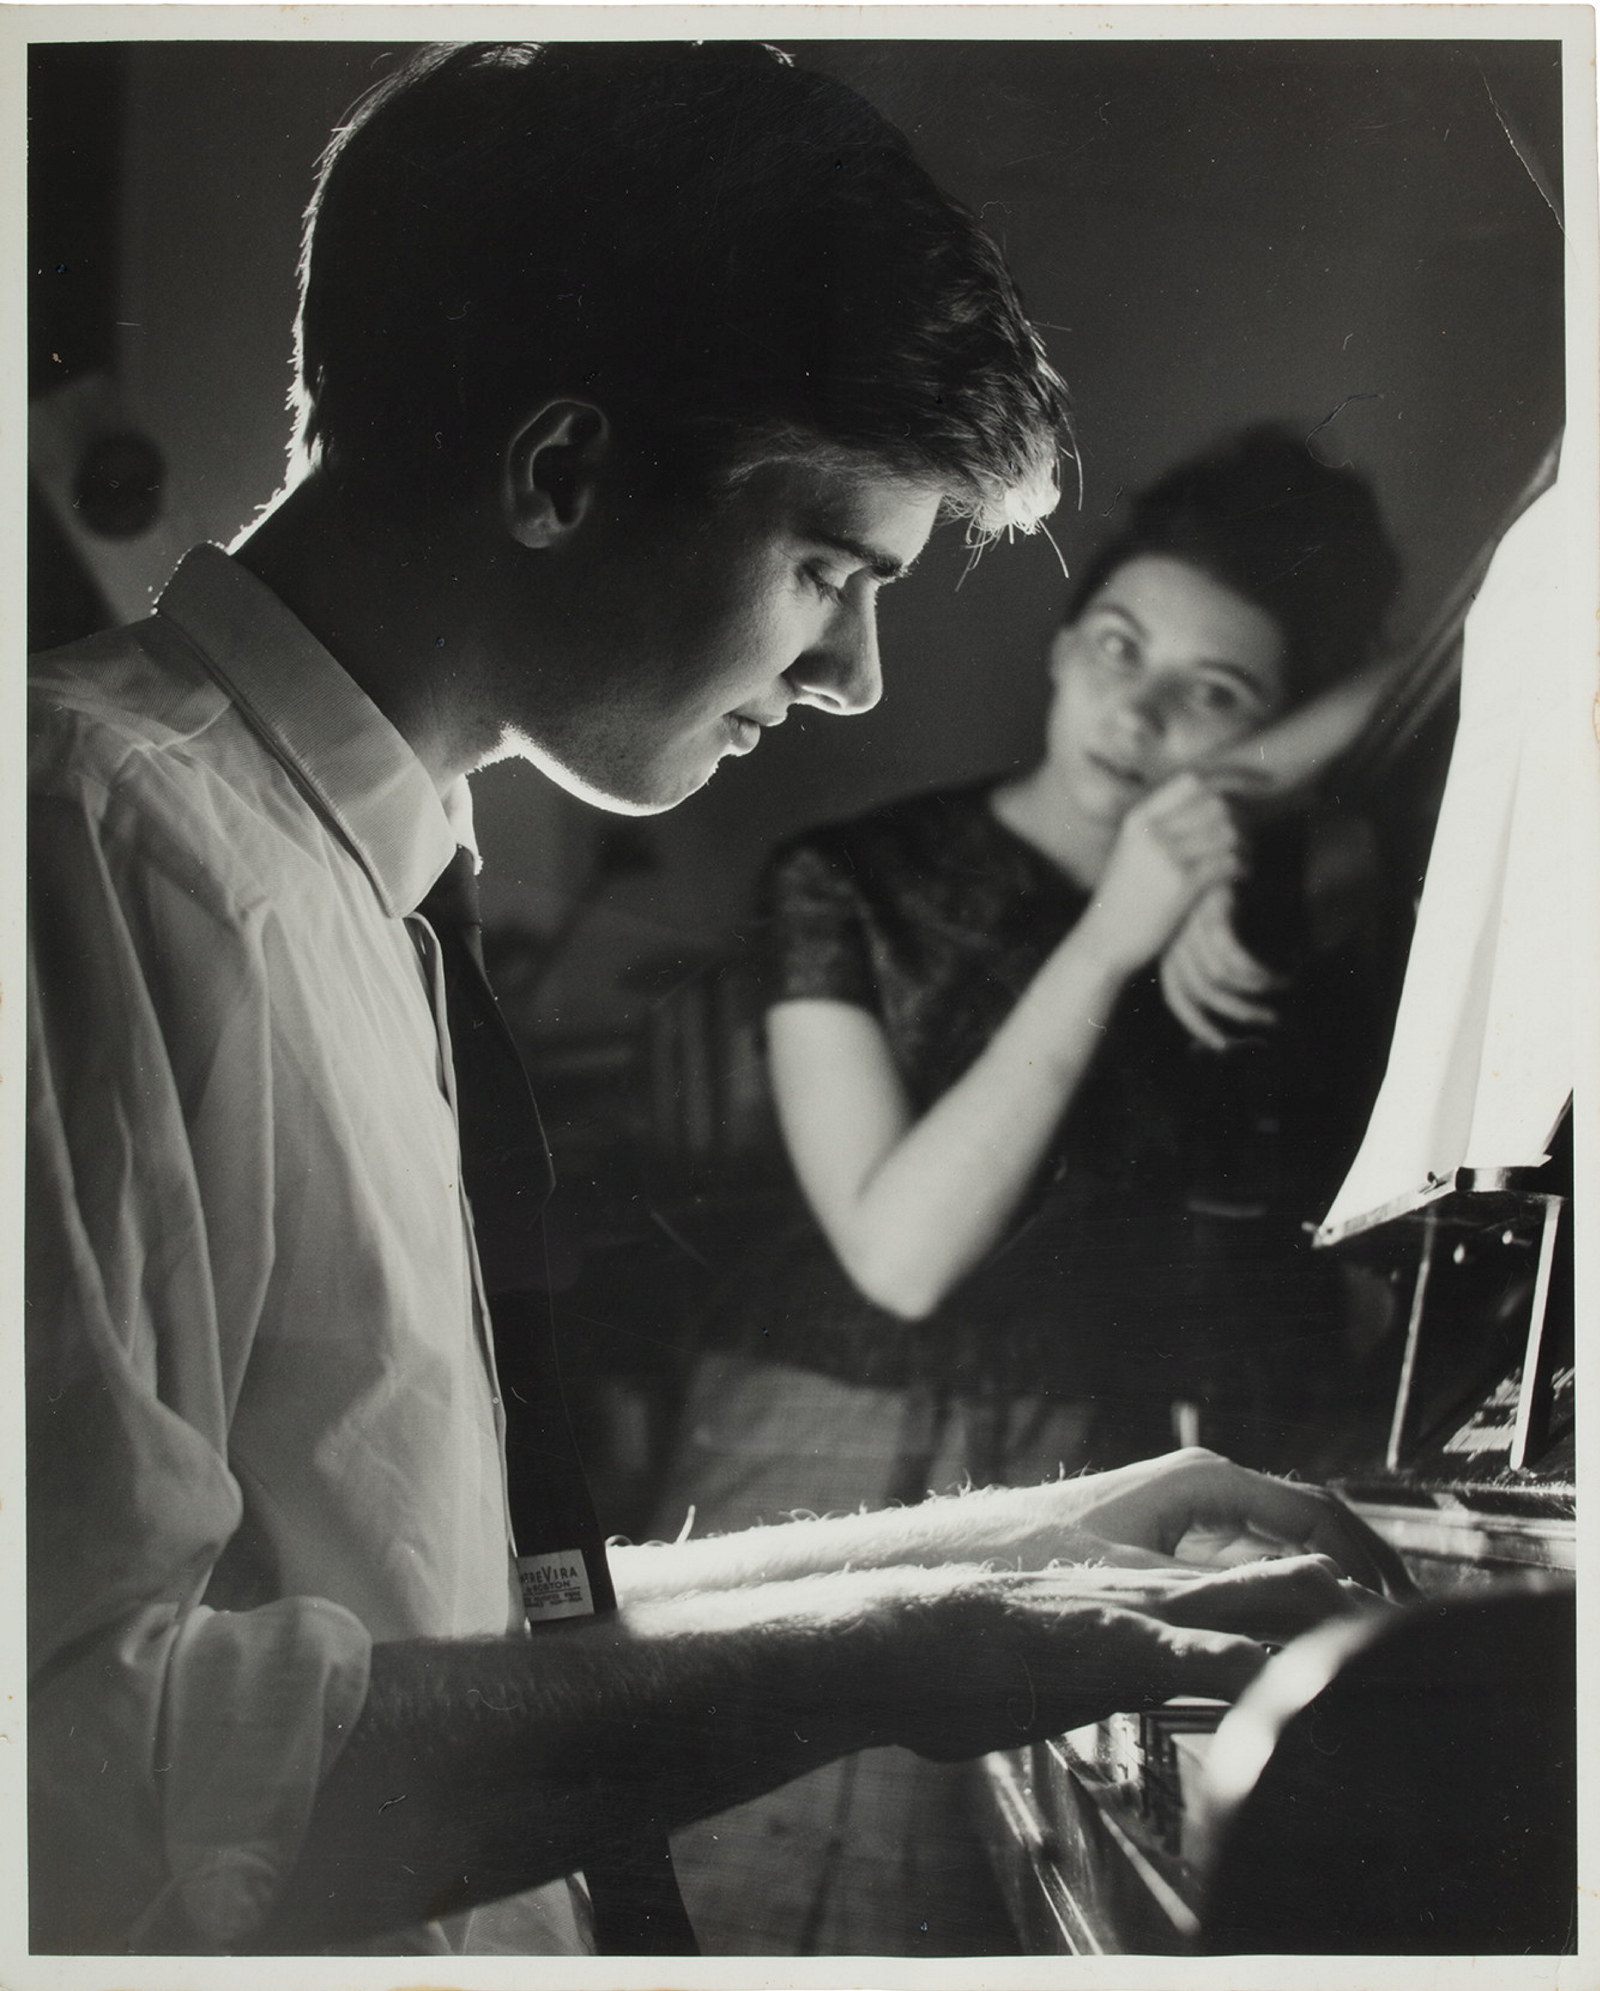 A black and white contemporary photograph of John Terry playing the piano. Caroline Terry (later Caroline Thornton) is shown in the background on right, leaning against the piano.